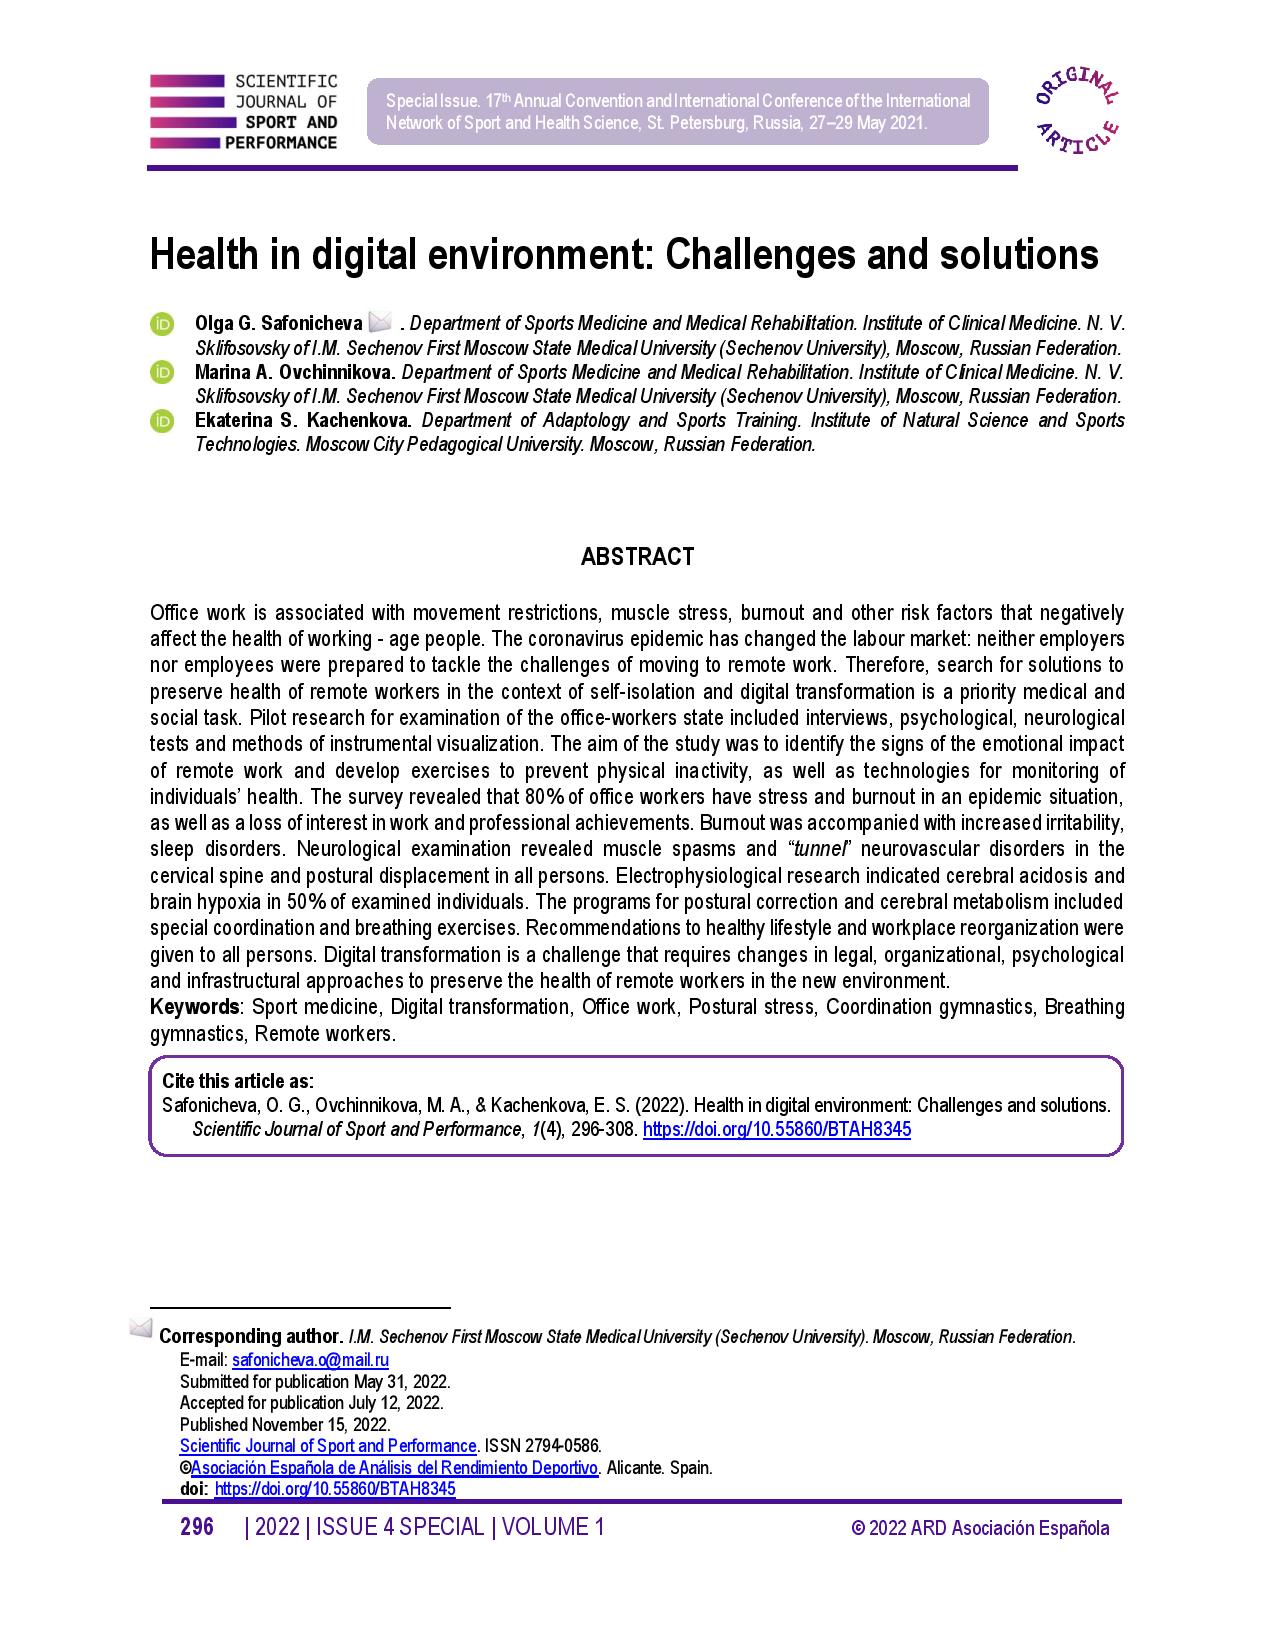 Health in digital environment: Challenges and solutions